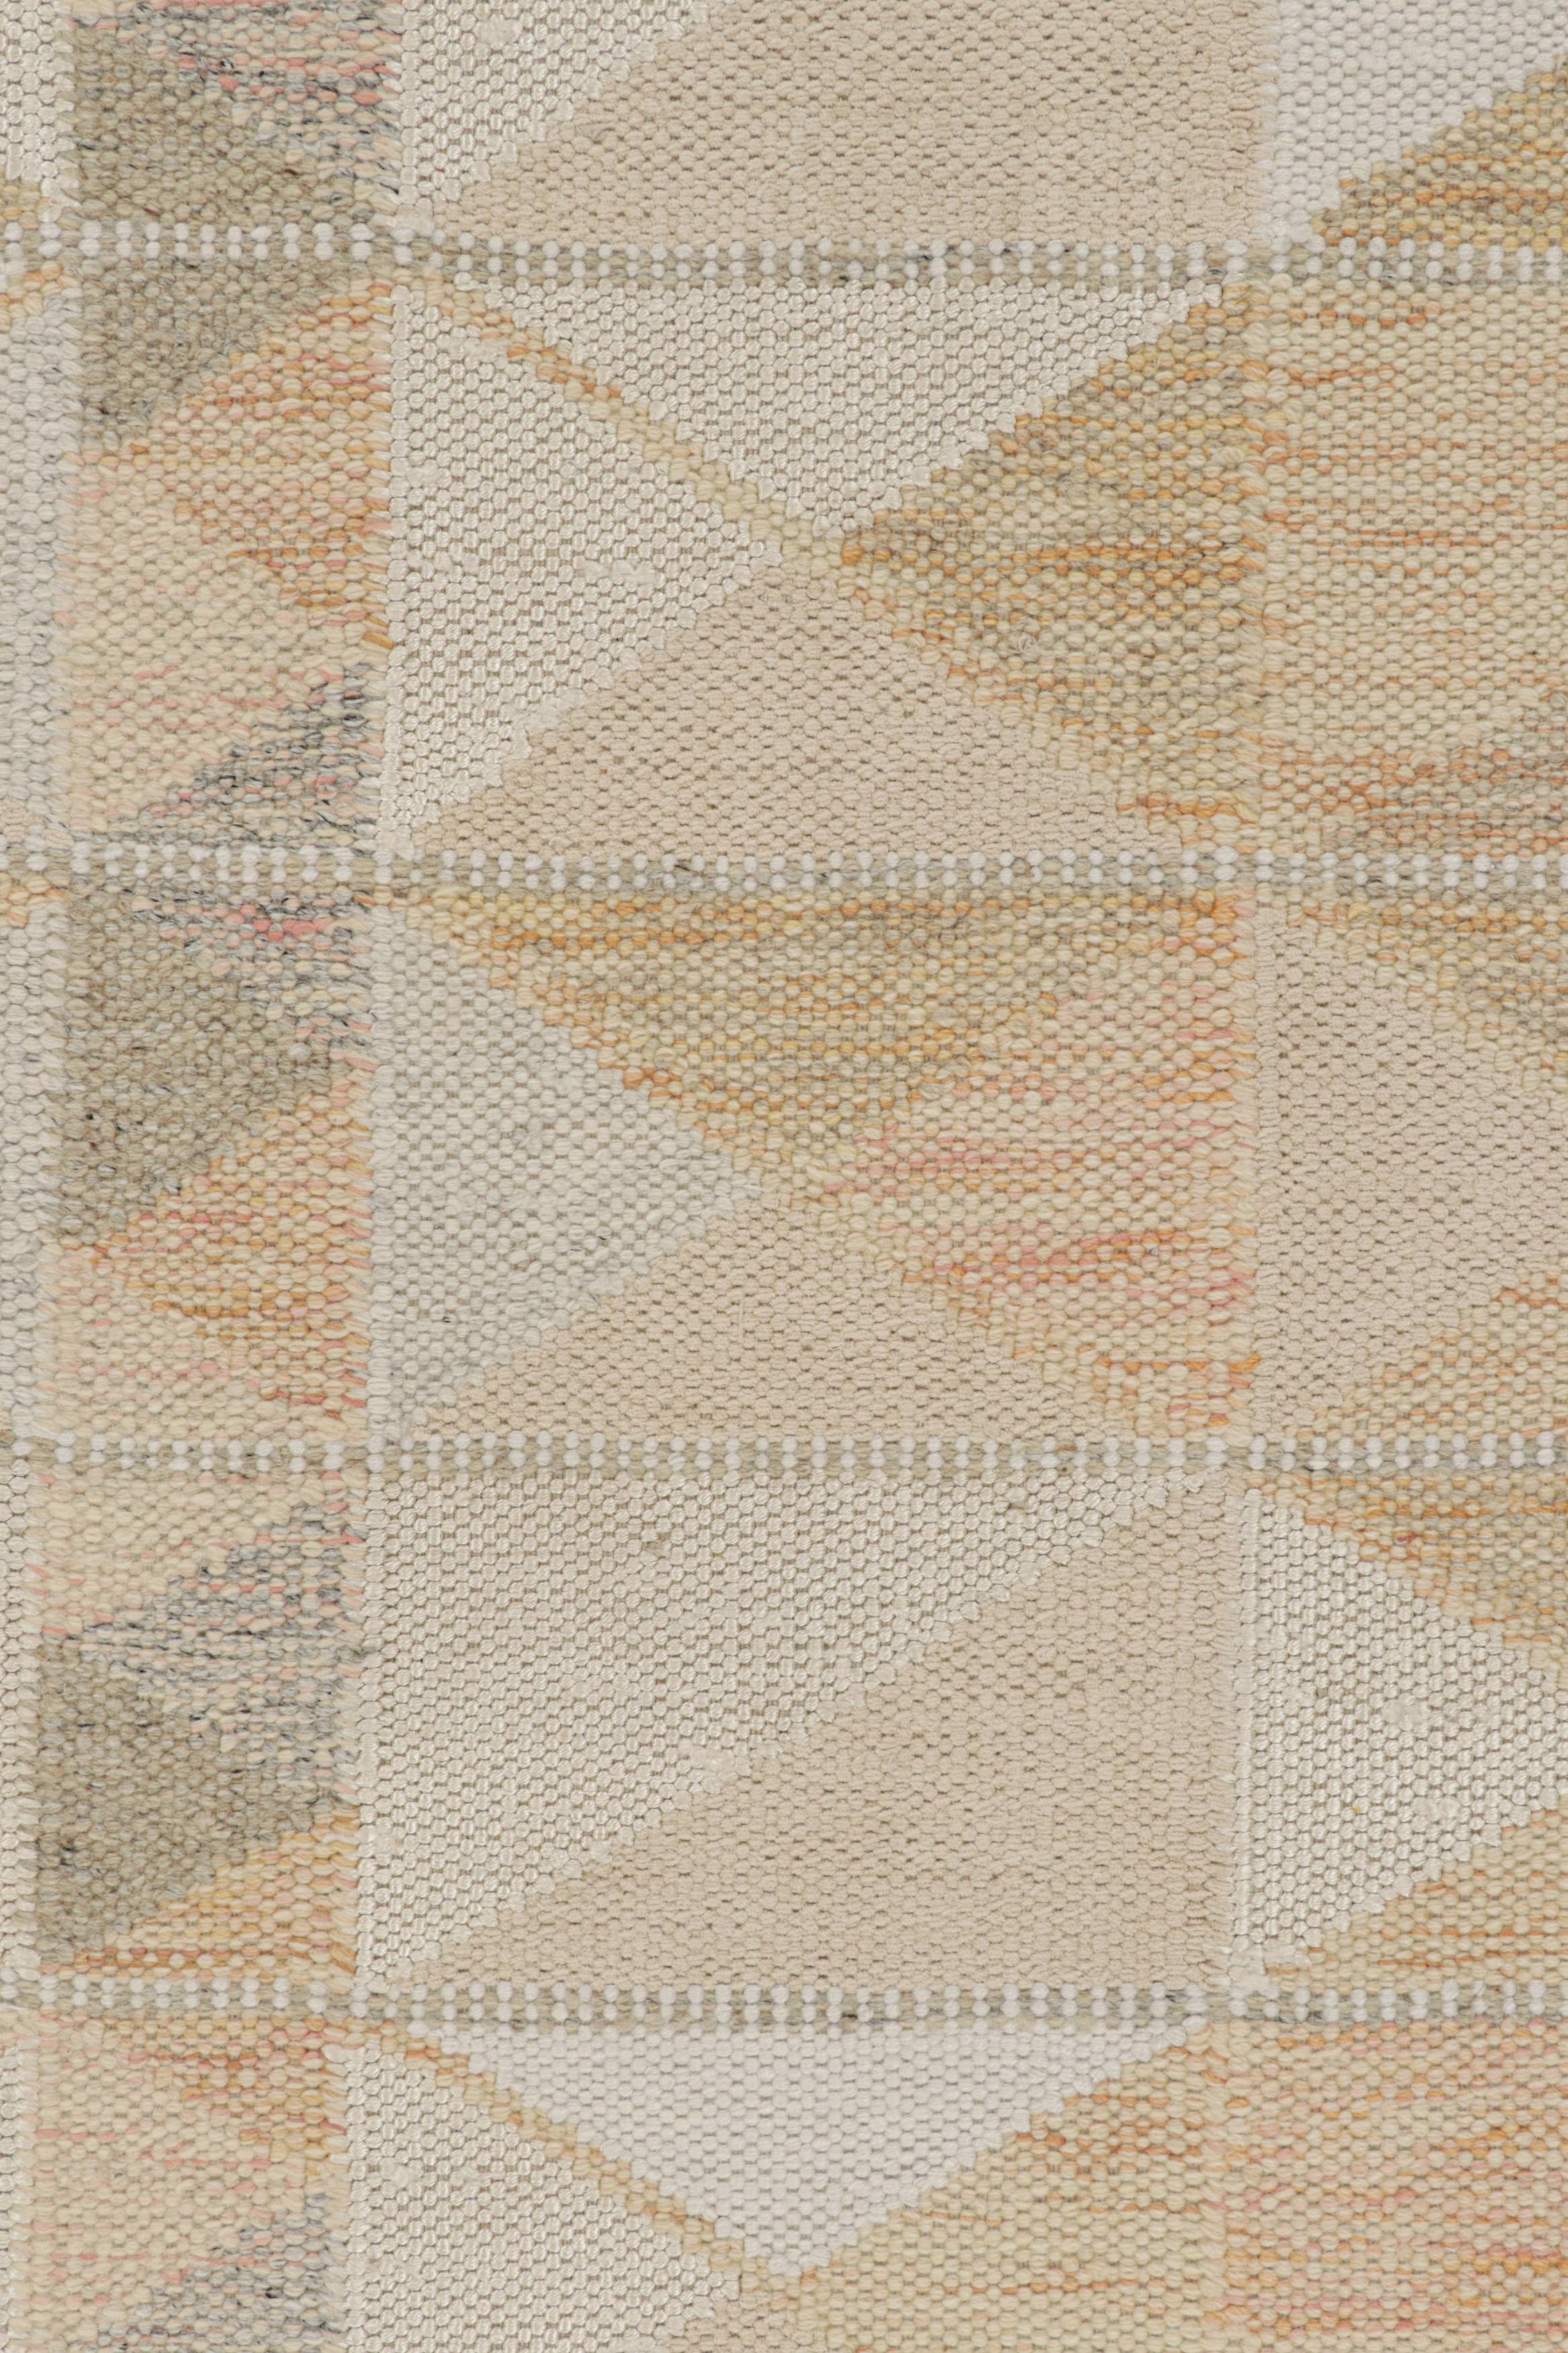 Modern Rug & Kilim’s Scandinavian Style Rug in Beige, Gray and White Geometric Patterns For Sale